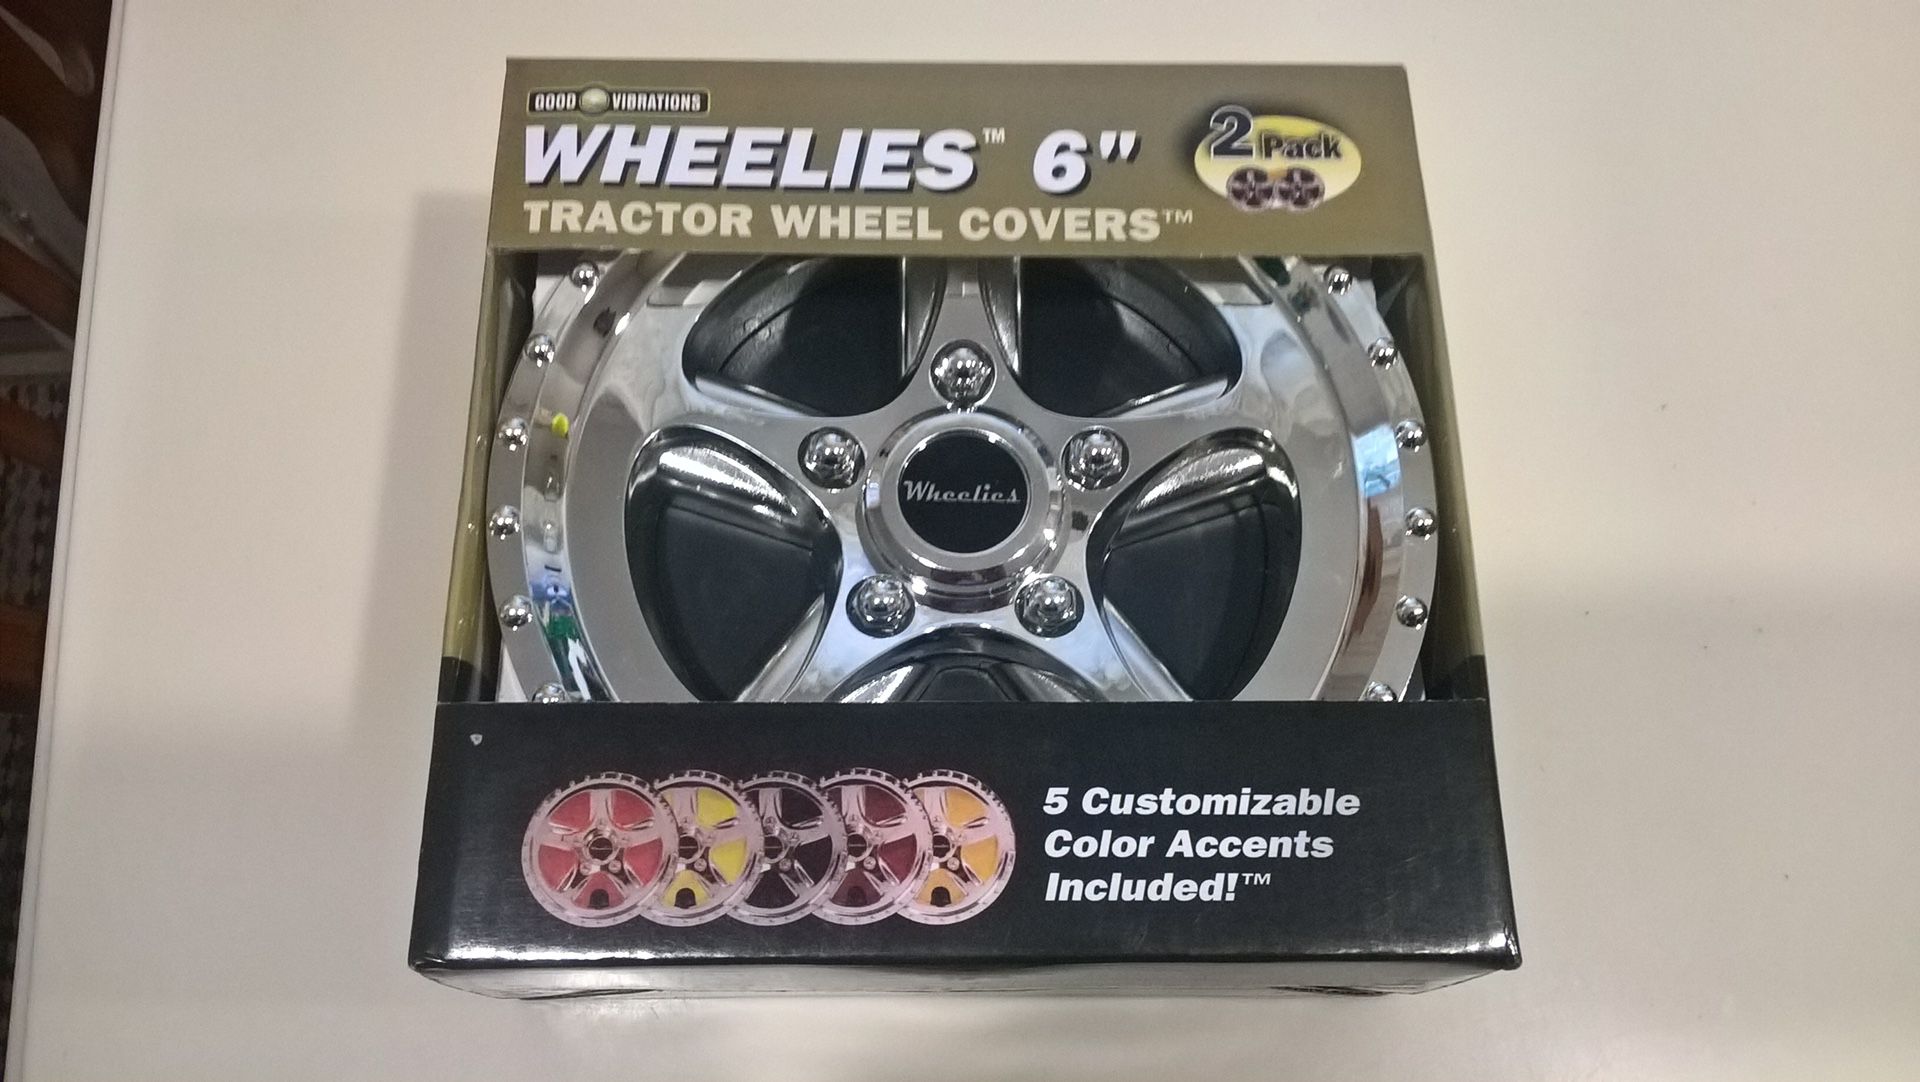 Good Vibrations .. Wheelies 6" Tractor Wheel Covers .. Brand New. There are 2 covers in box Wheelies fit on most front Lawn Tractor wheels. 5 Custom